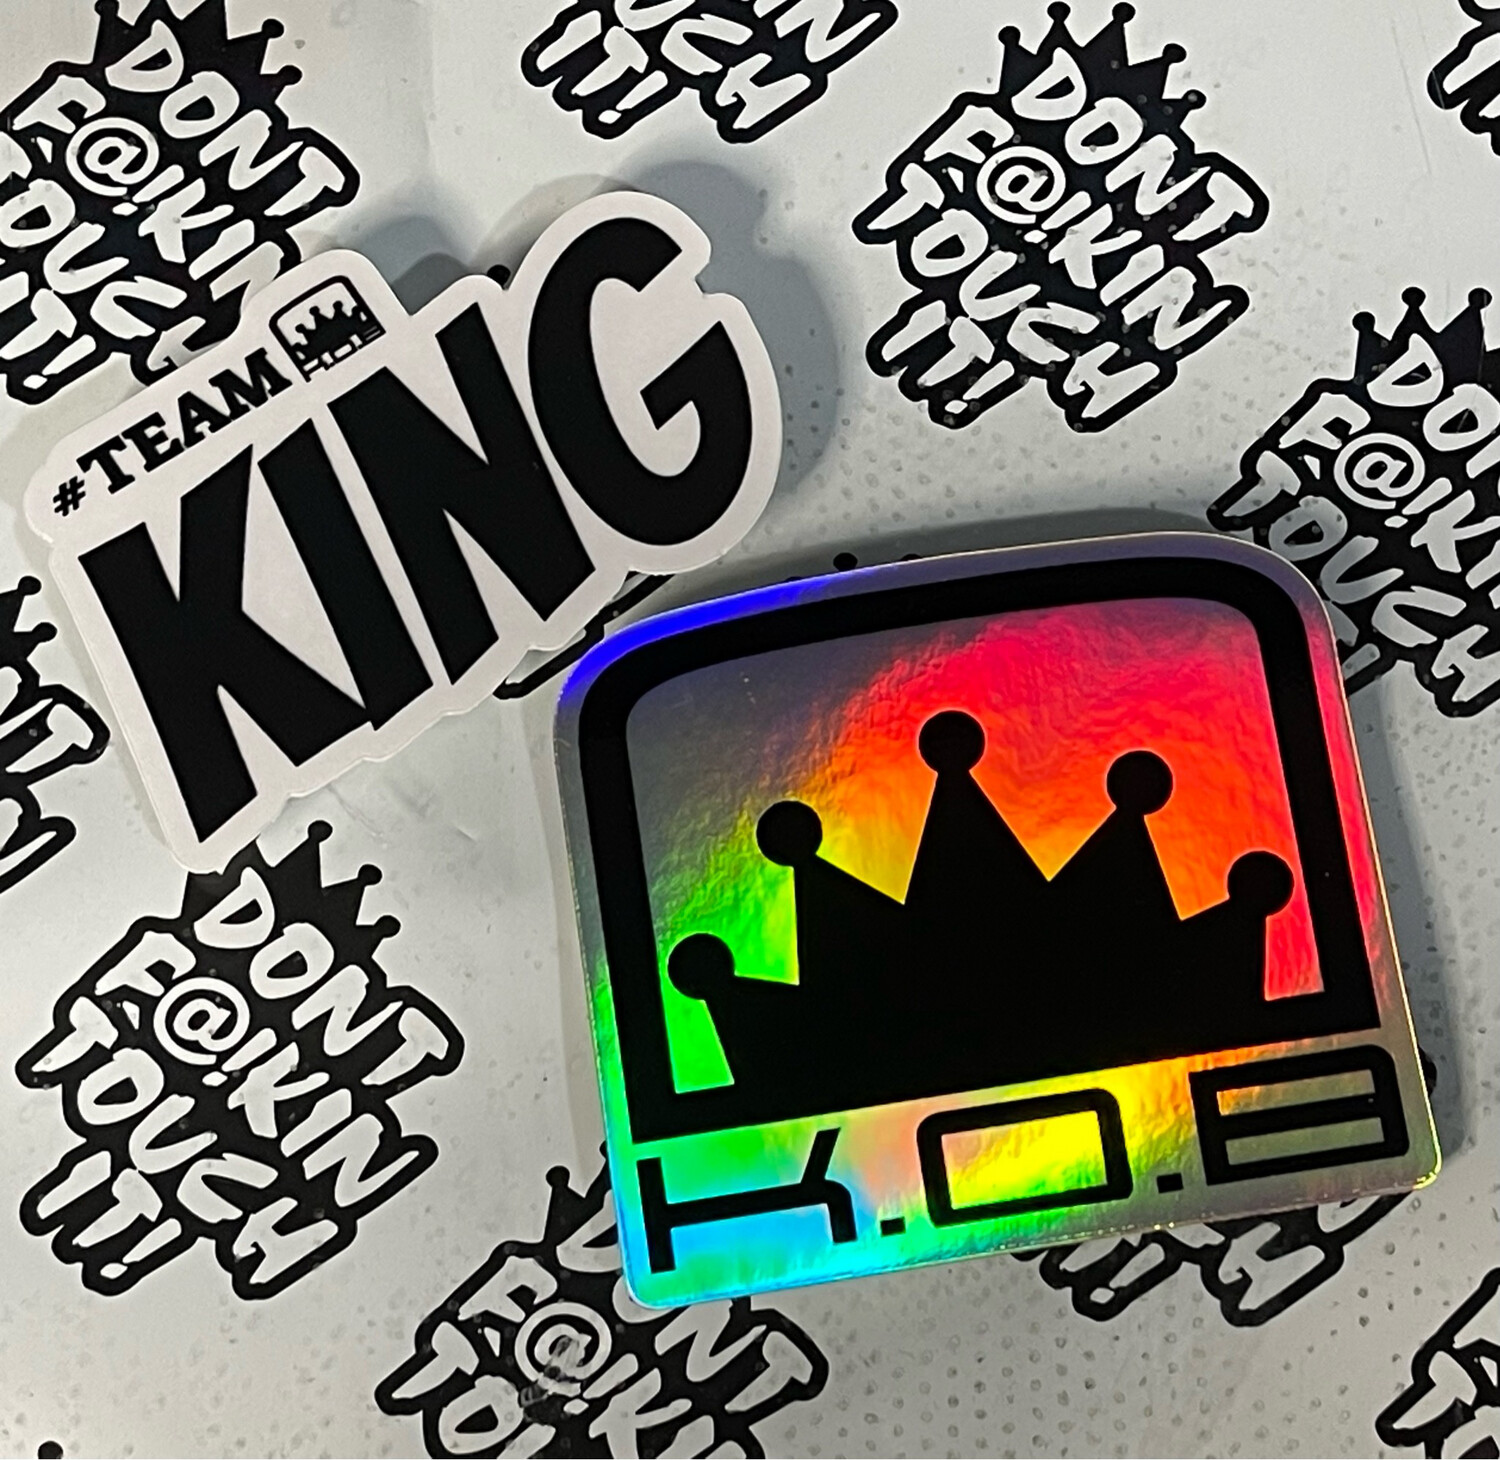 TEAM KING Holographic sticker pack